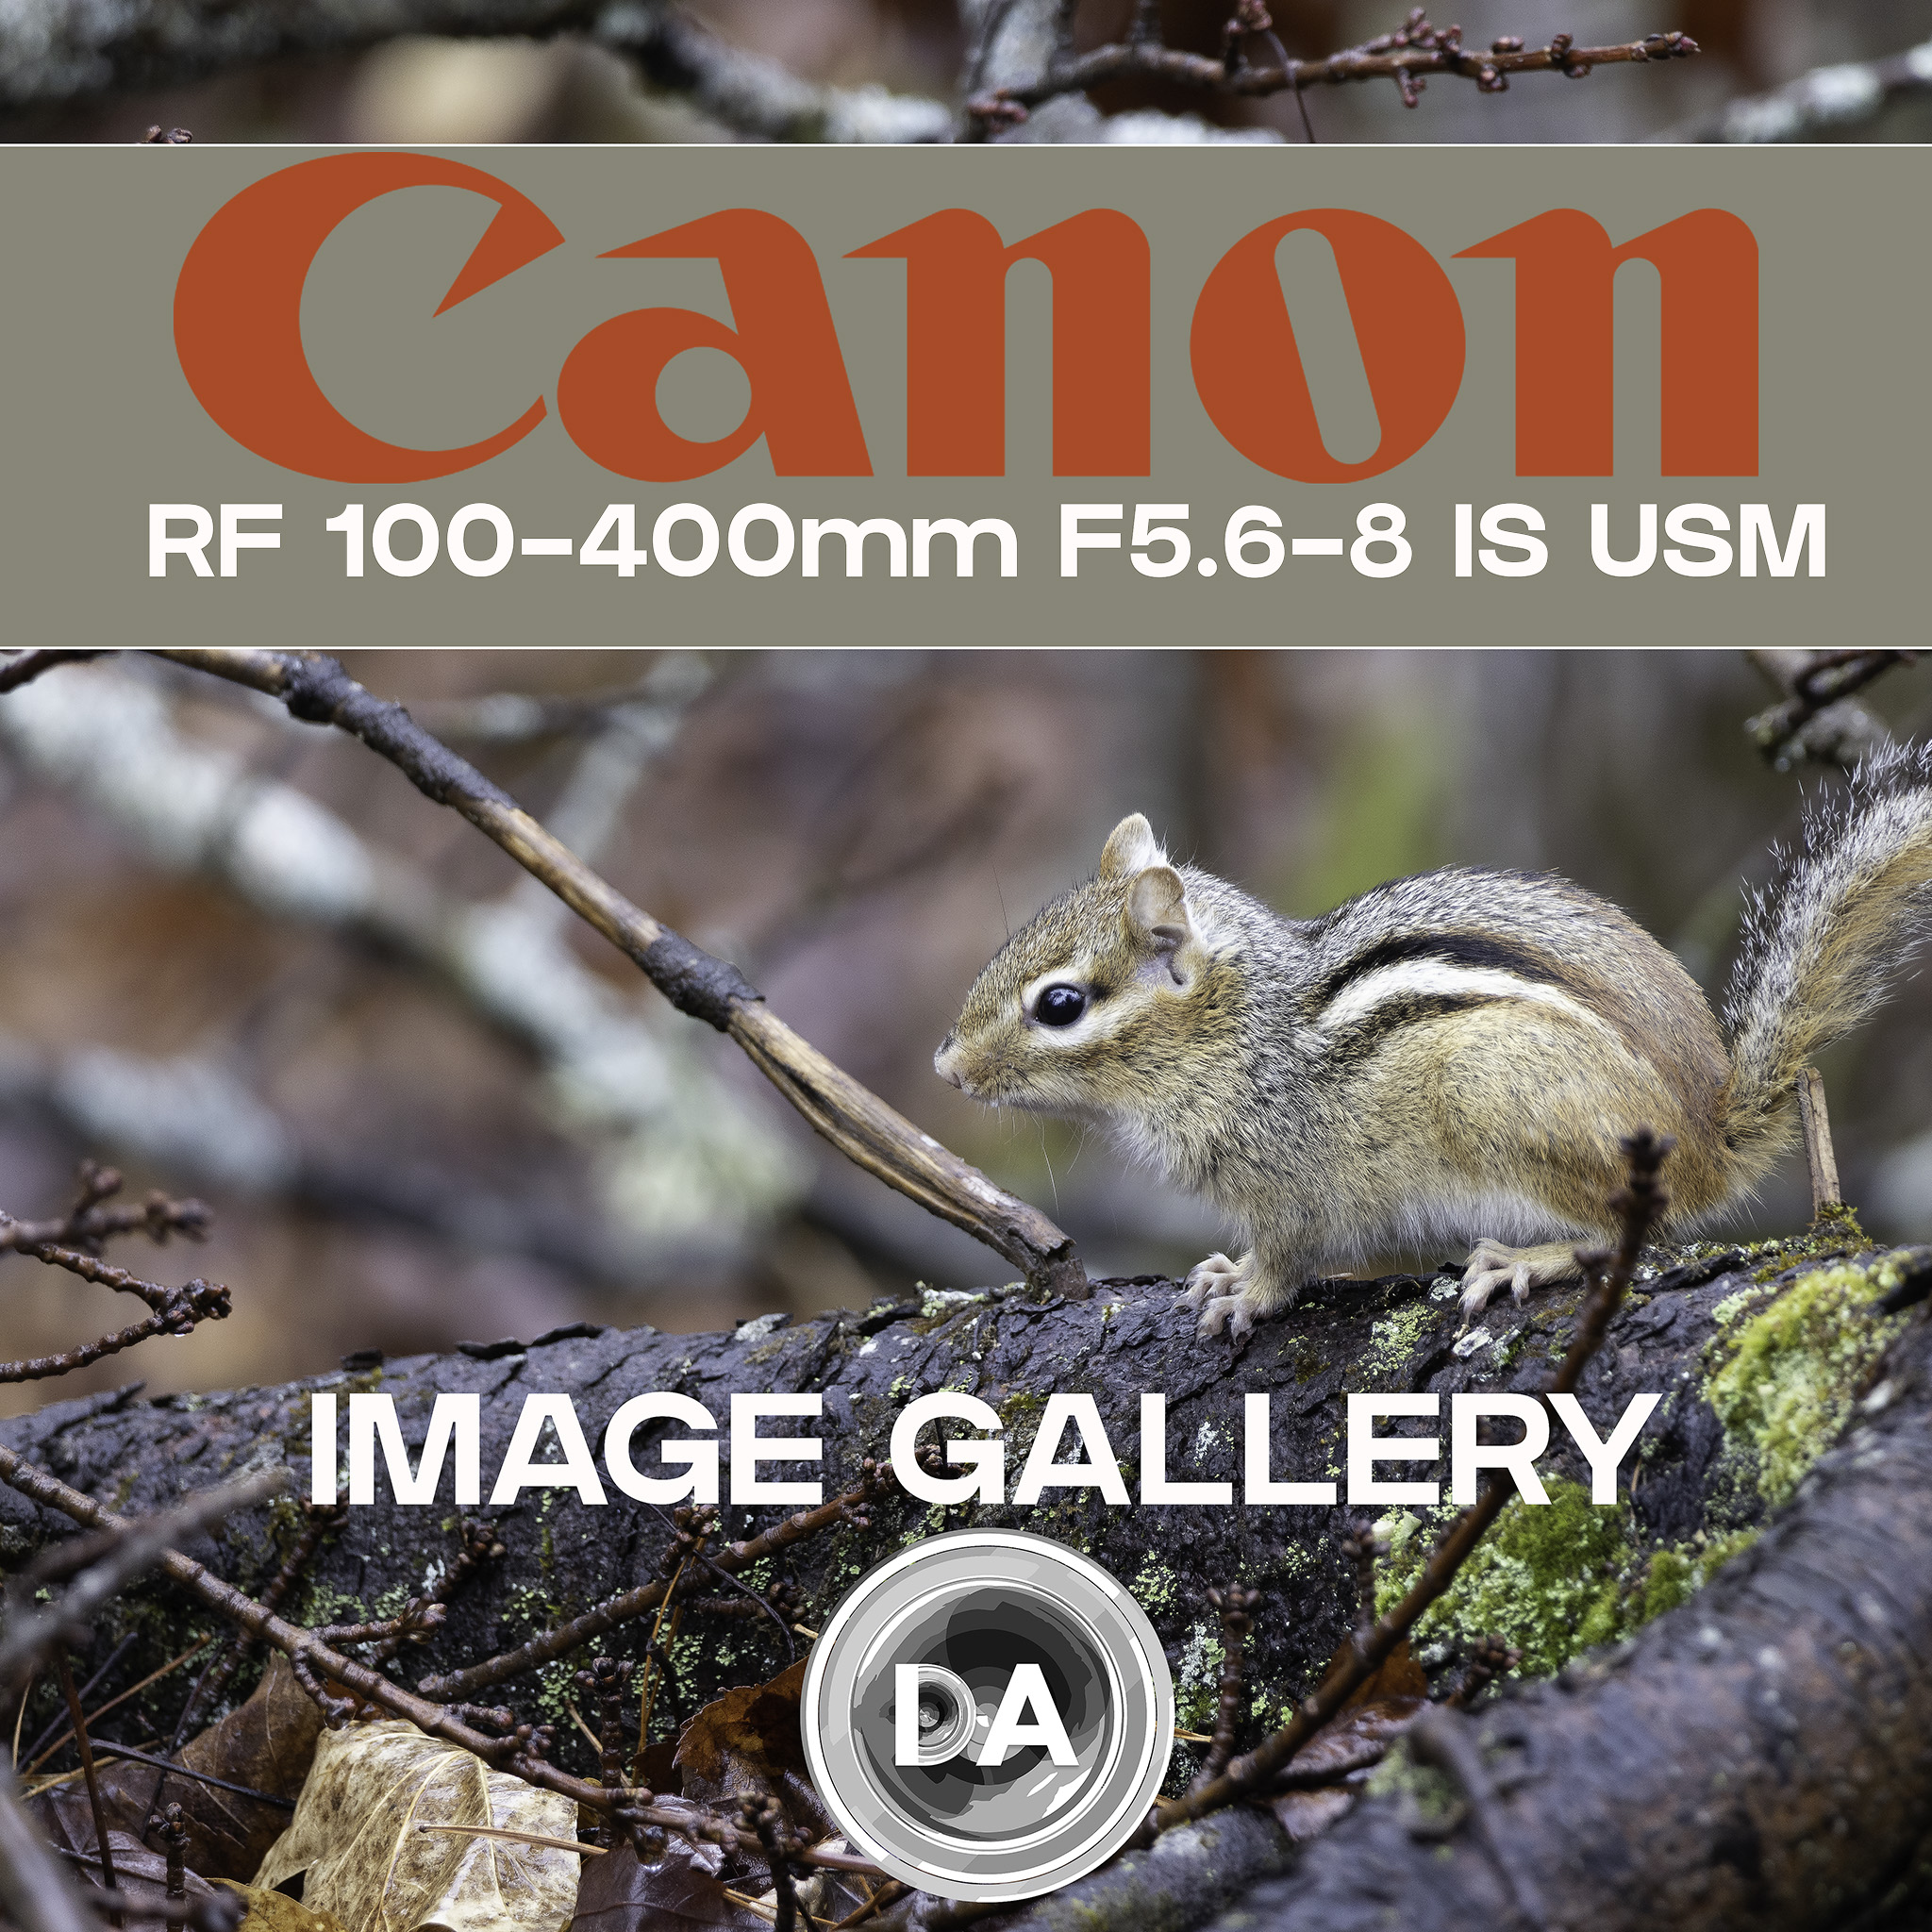 Canon RF Gallery Image F5.6-8 100-400mm IS USM